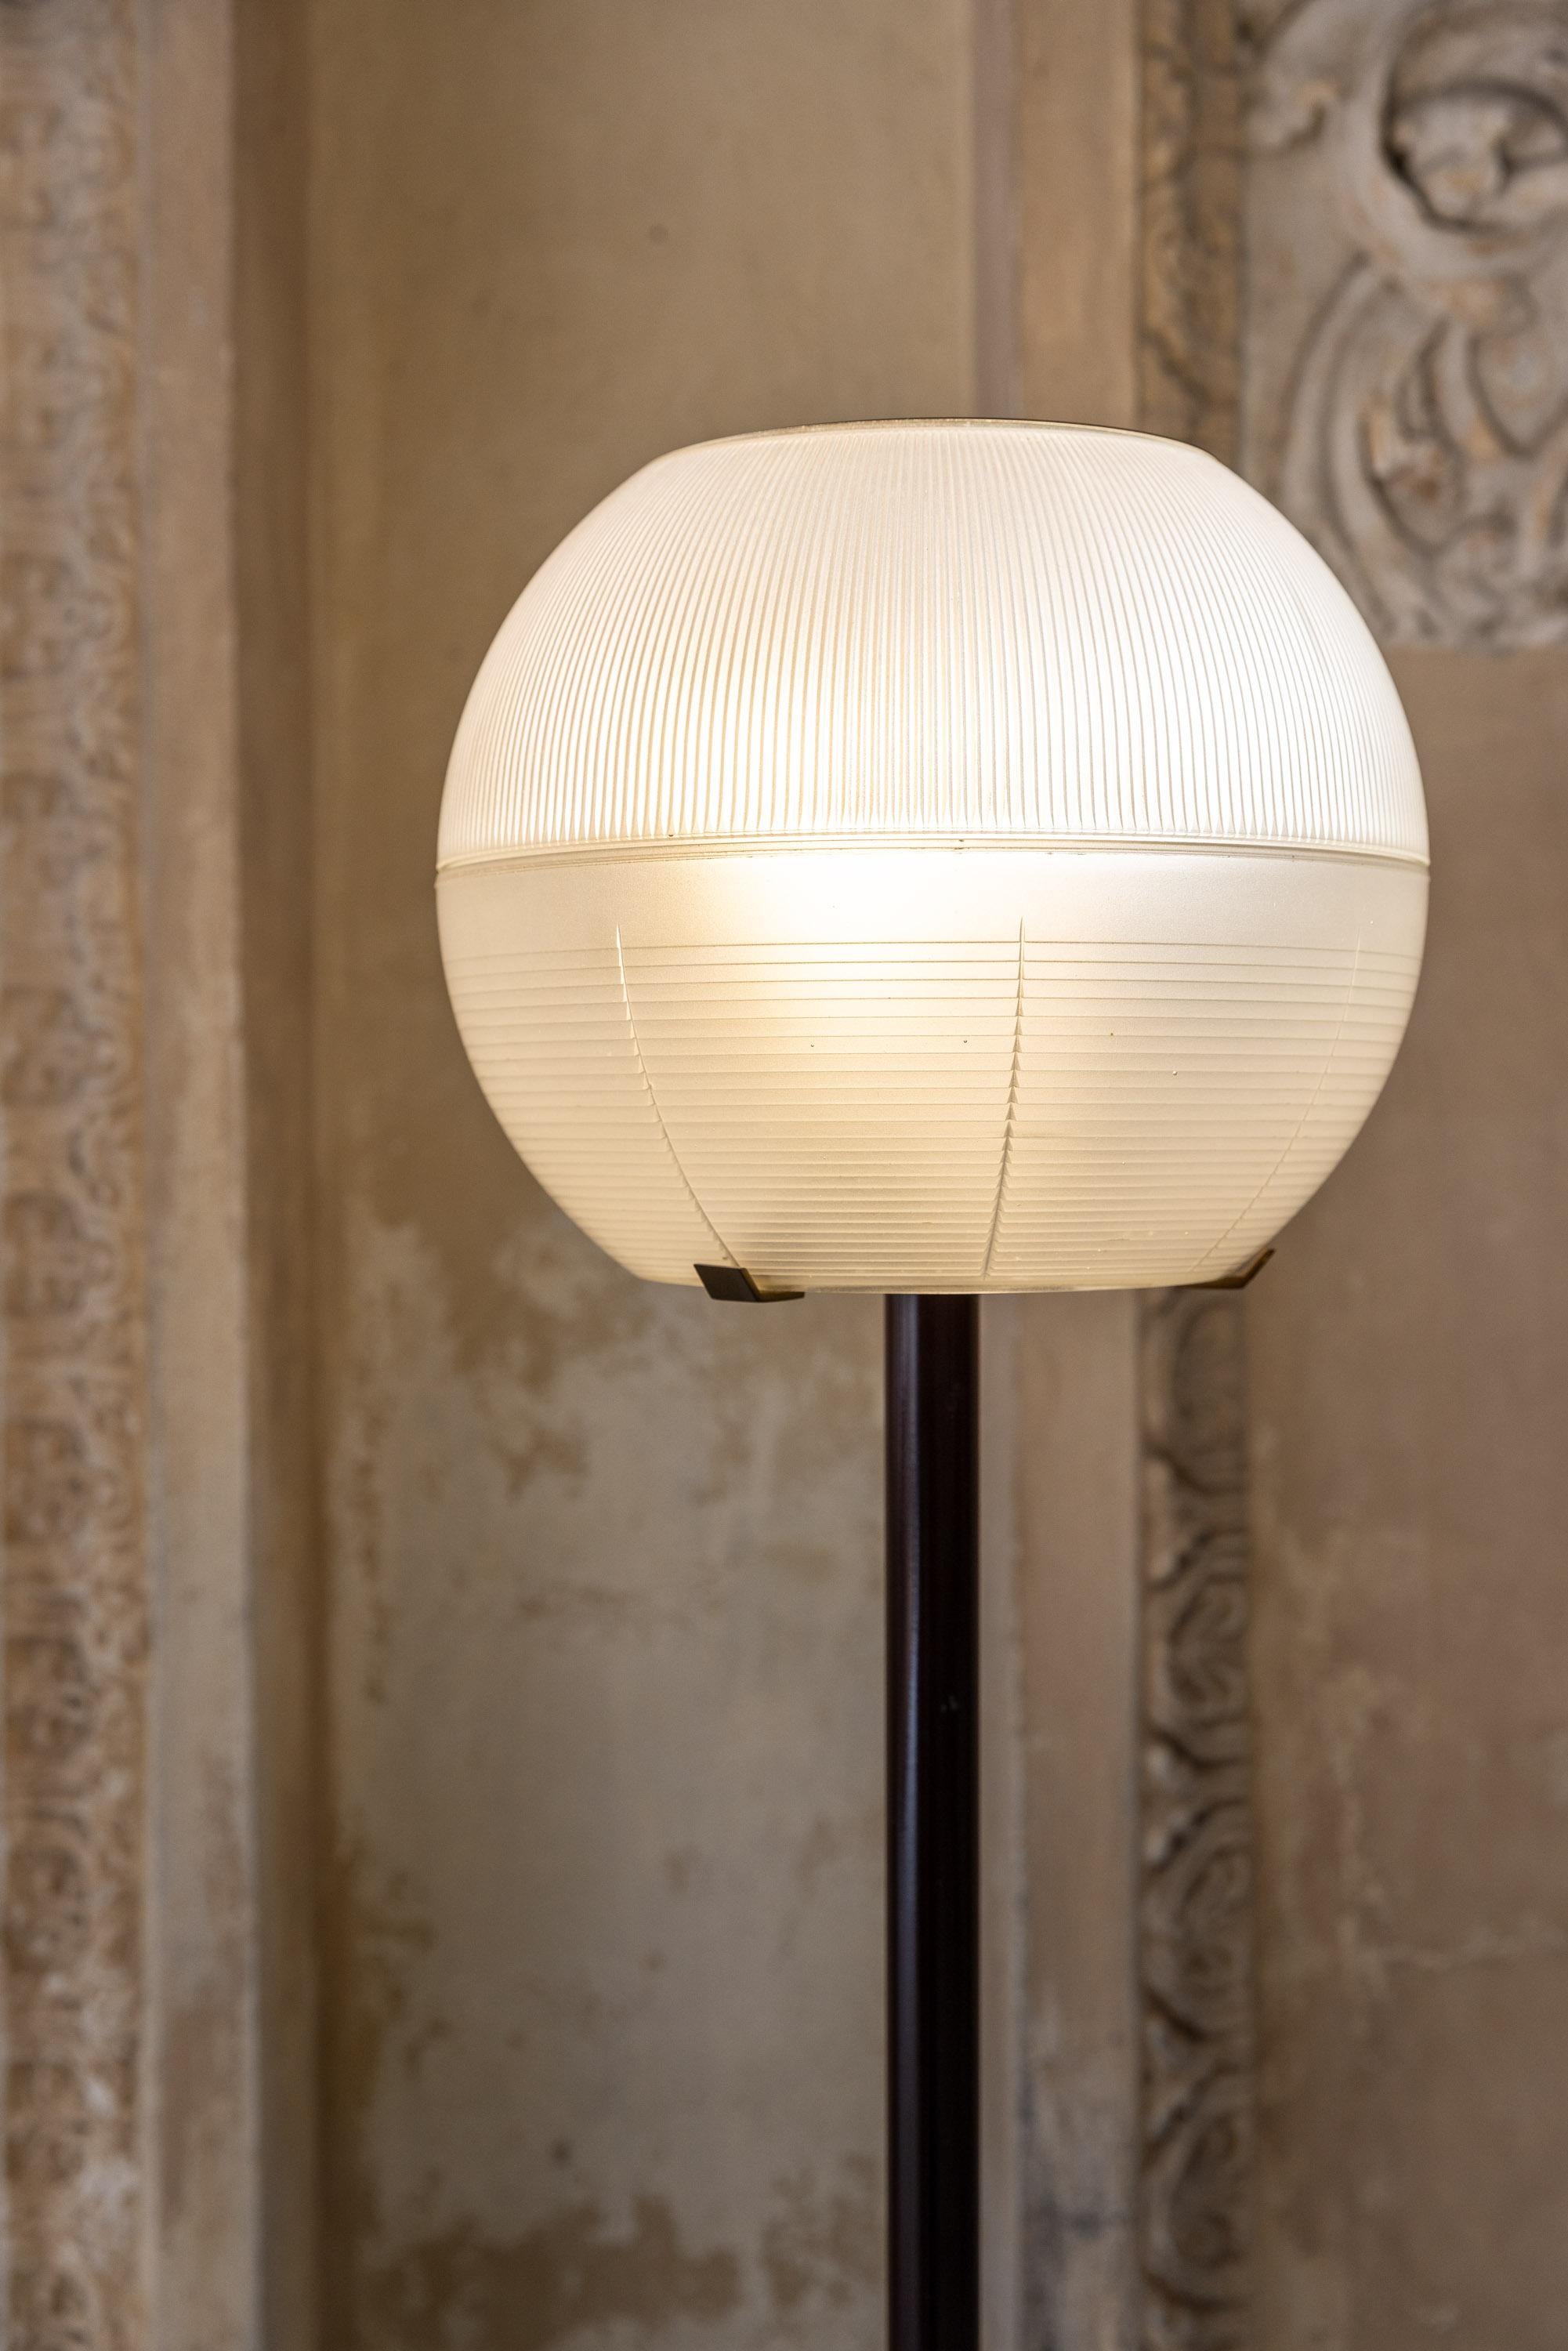 Midcentury floor Lamp mod. LTE 8 by Ignazio Gardella for Azucena, Italy 1956 For Sale 2